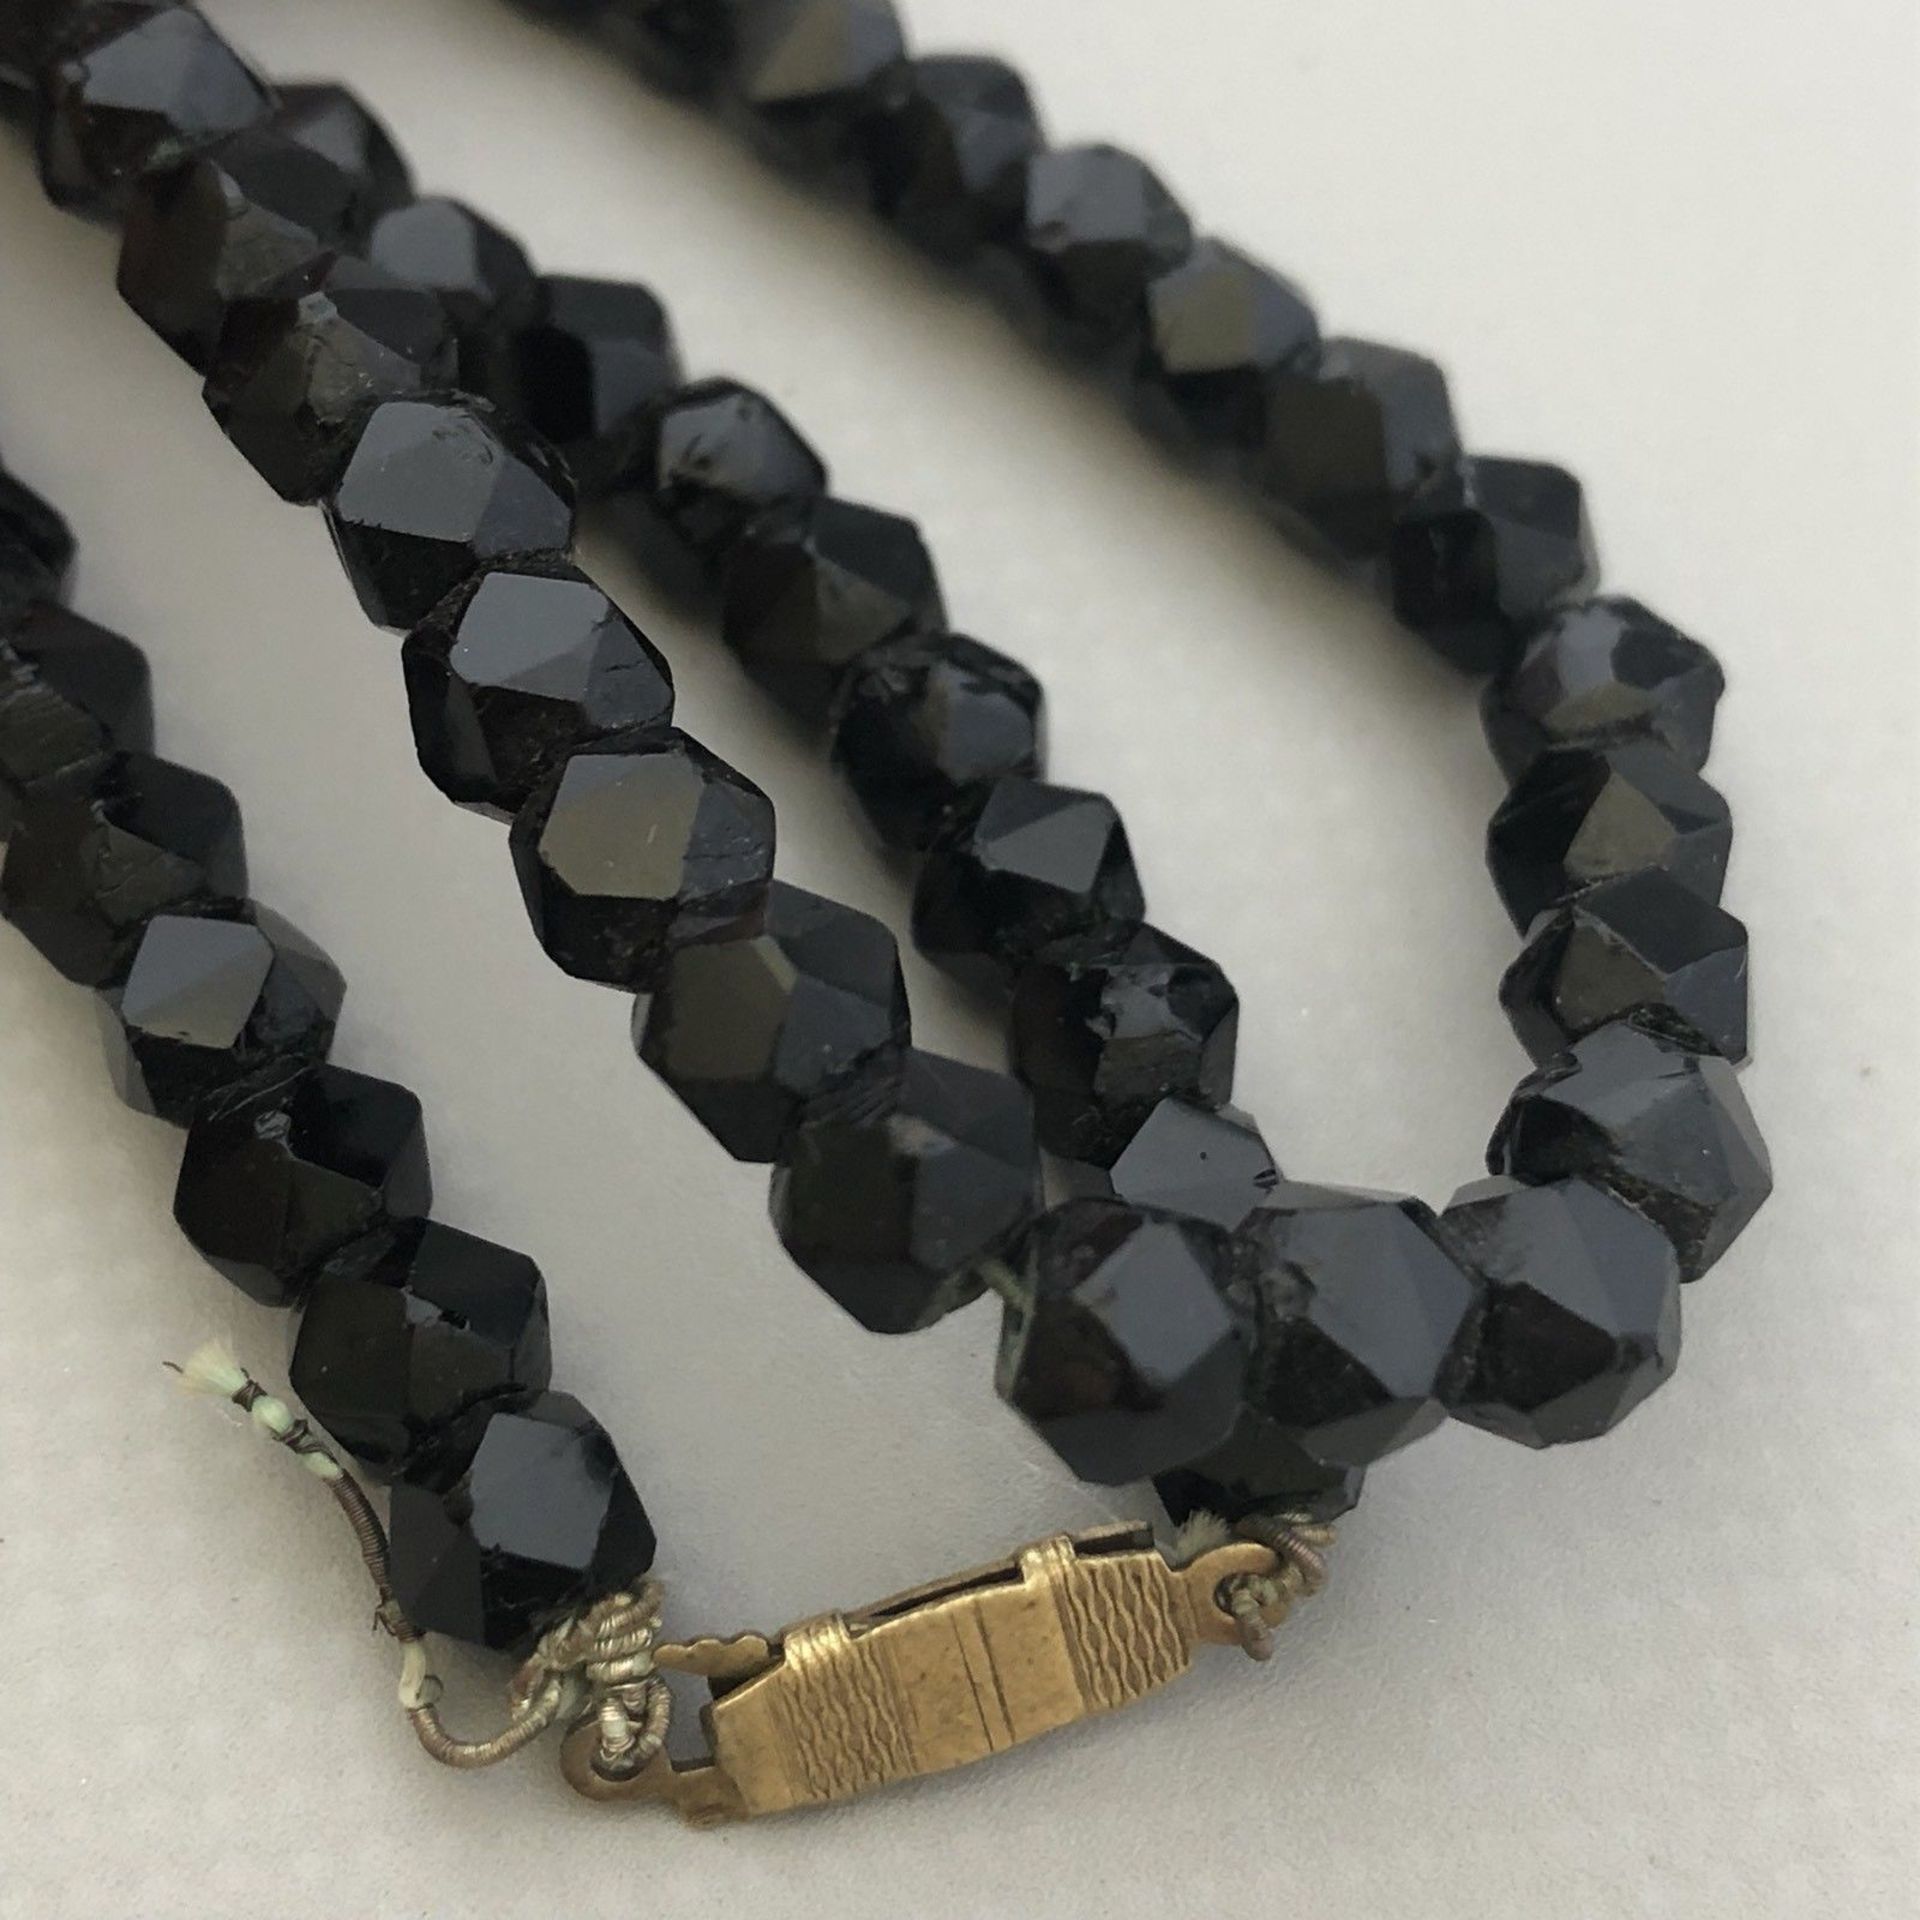 Antique Victorian Mourning Jewellery - Carved Faceted Whitby Jet Bead Necklace - Image 2 of 3